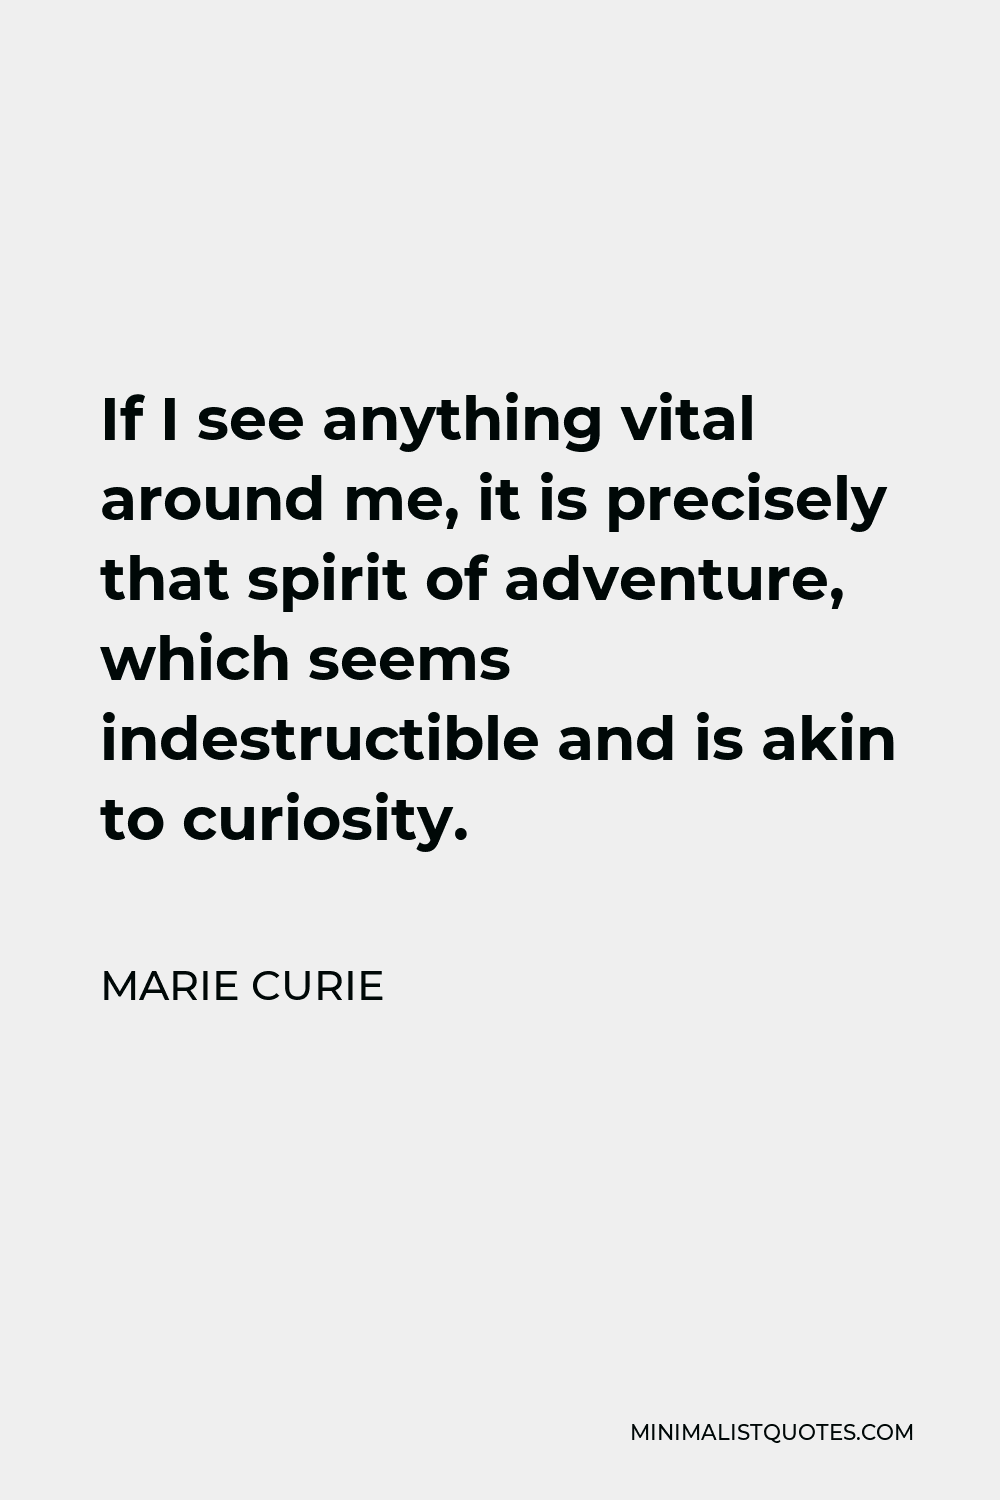 Marie Curie Quote - If I see anything vital around me, it is precisely that spirit of adventure, which seems indestructible and is akin to curiosity.